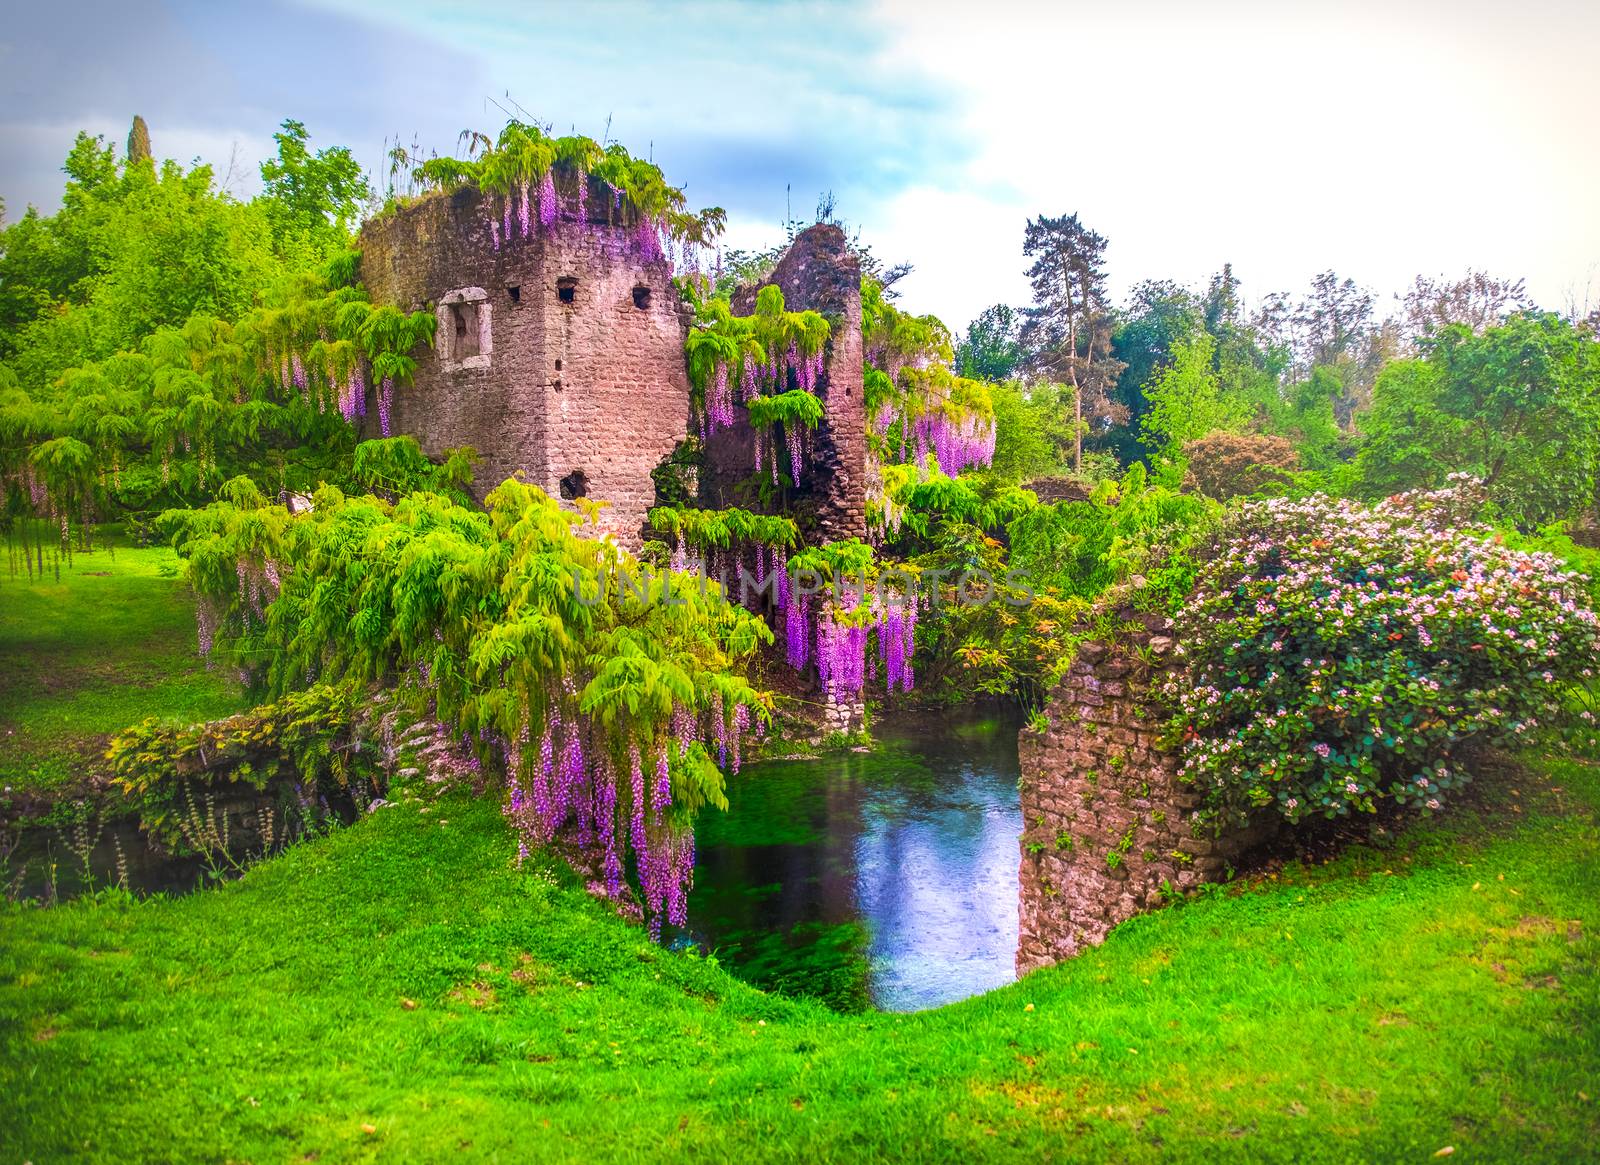 wisteria flowers in fairy garden of ninfa in Italy - medieval tower ruin surrounded by river by LucaLorenzelli